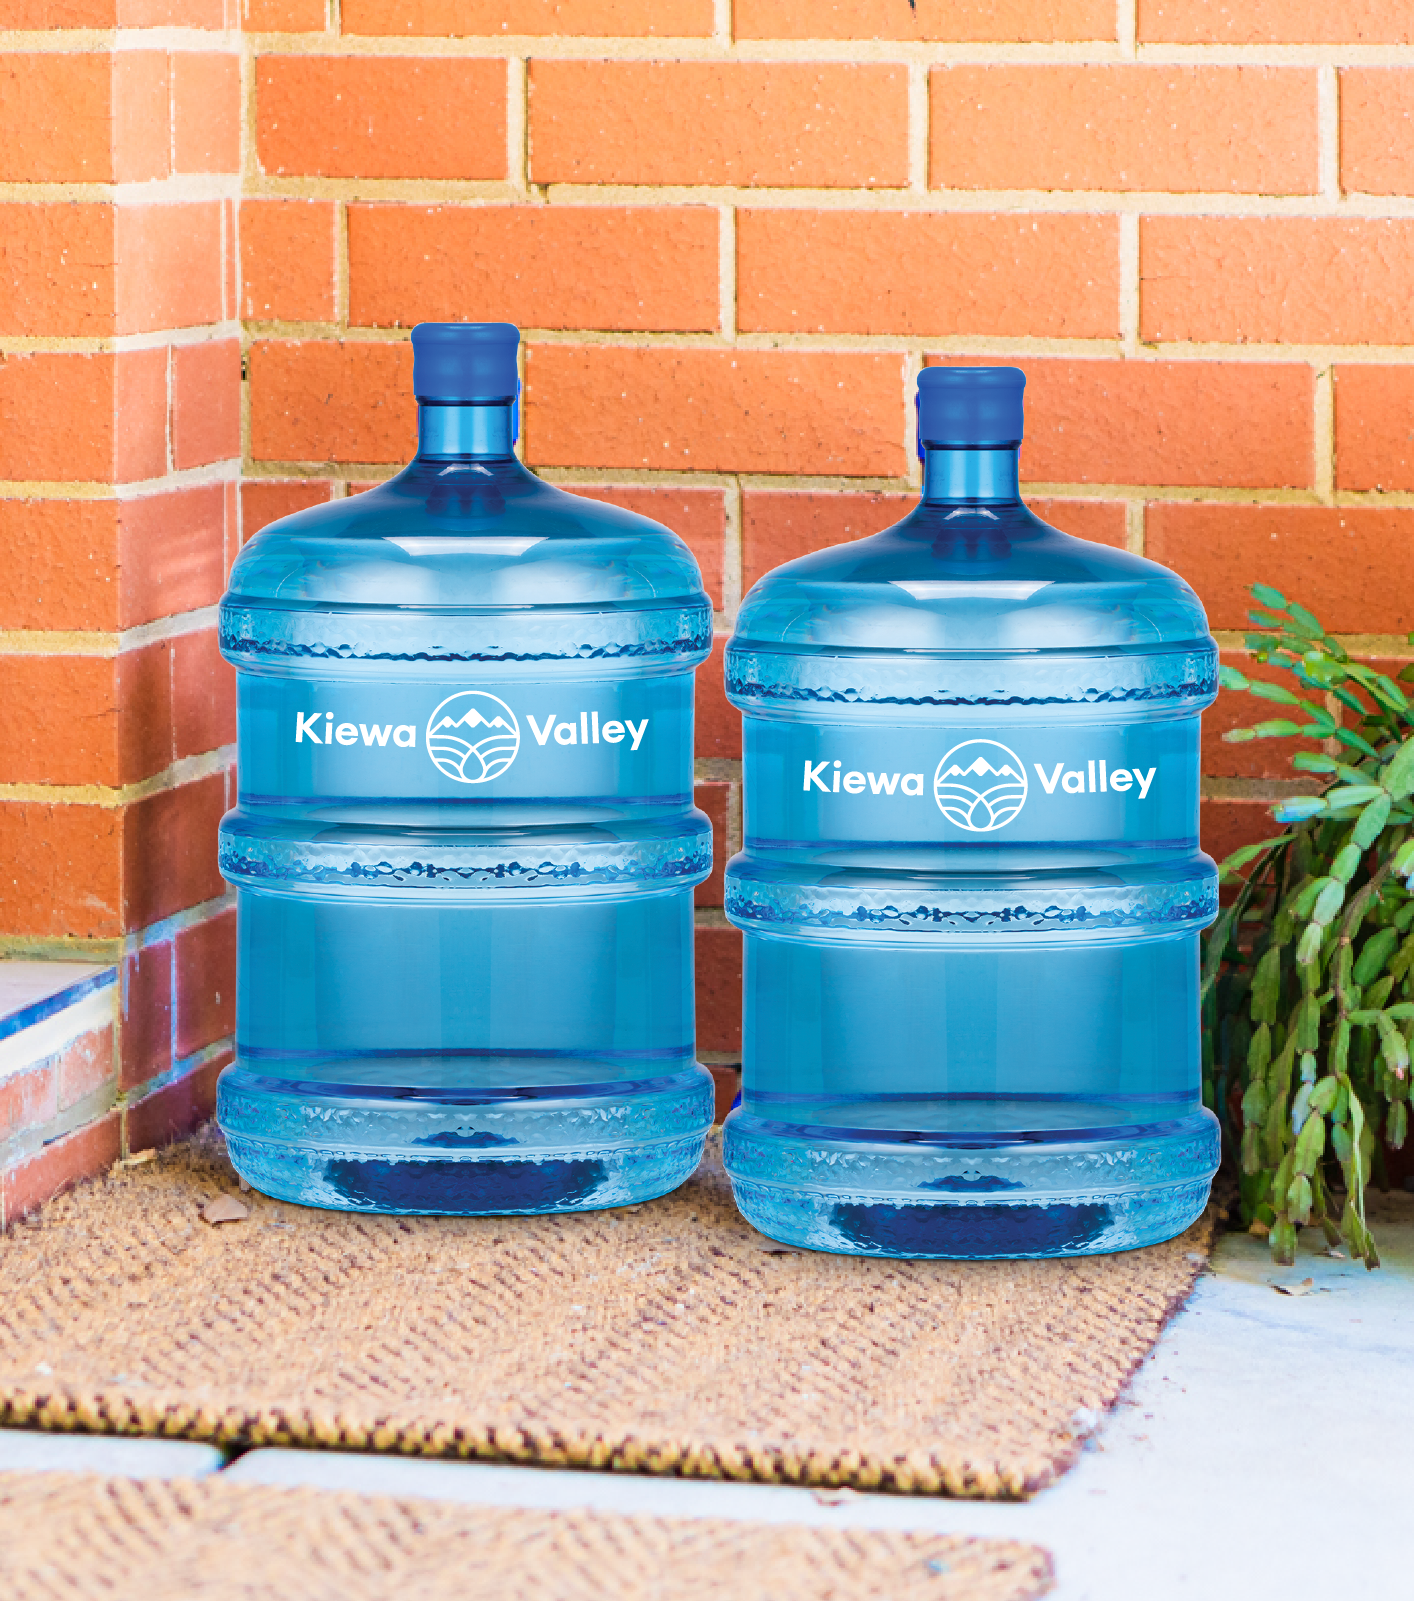 Why should I drink Kiewa Valley Water?